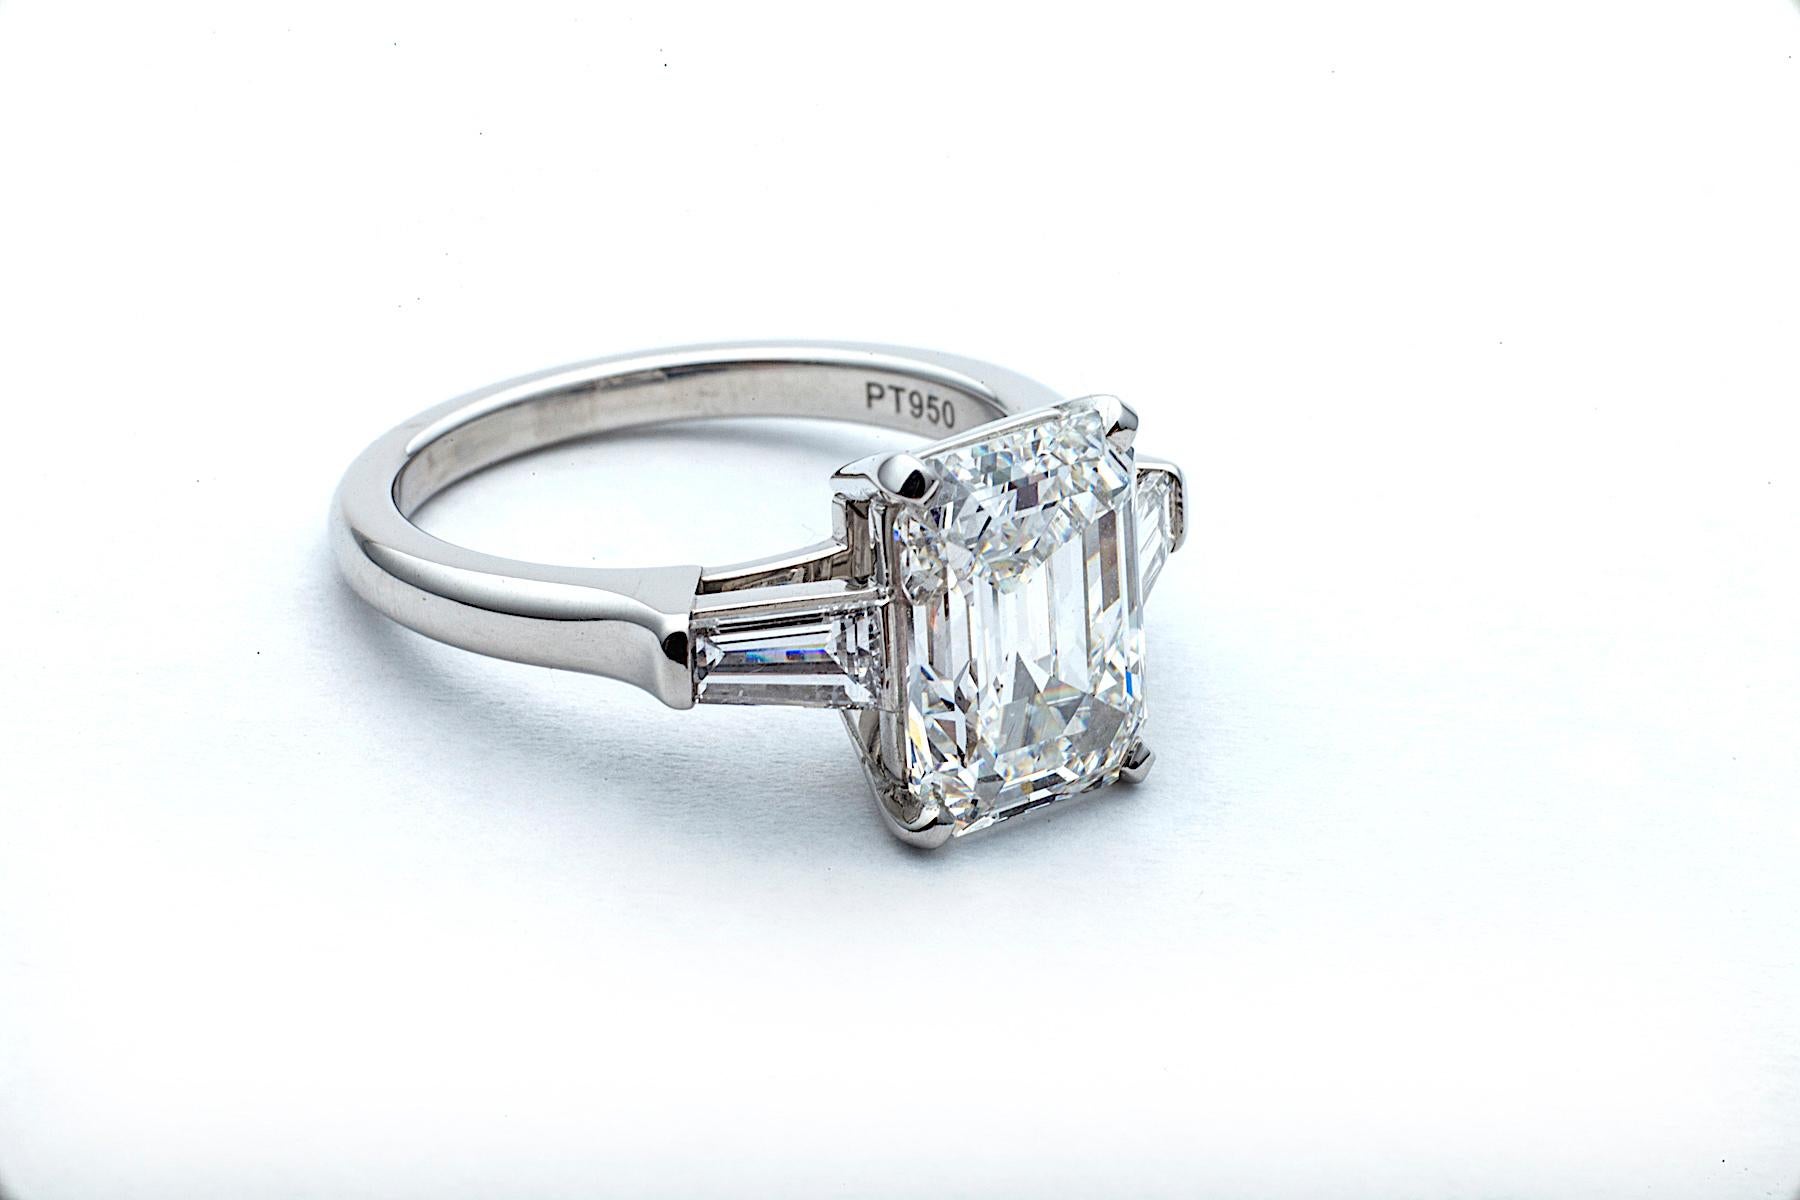 Looking like pure sparkling ice, this spectacular vintage emerald cut diamond engagement ring has a one-of-a-kind personality. Designed with a handmade platinum mounting, its sleek and elegant 3.46 carat, E color, VS2 clarity,  center diamond is